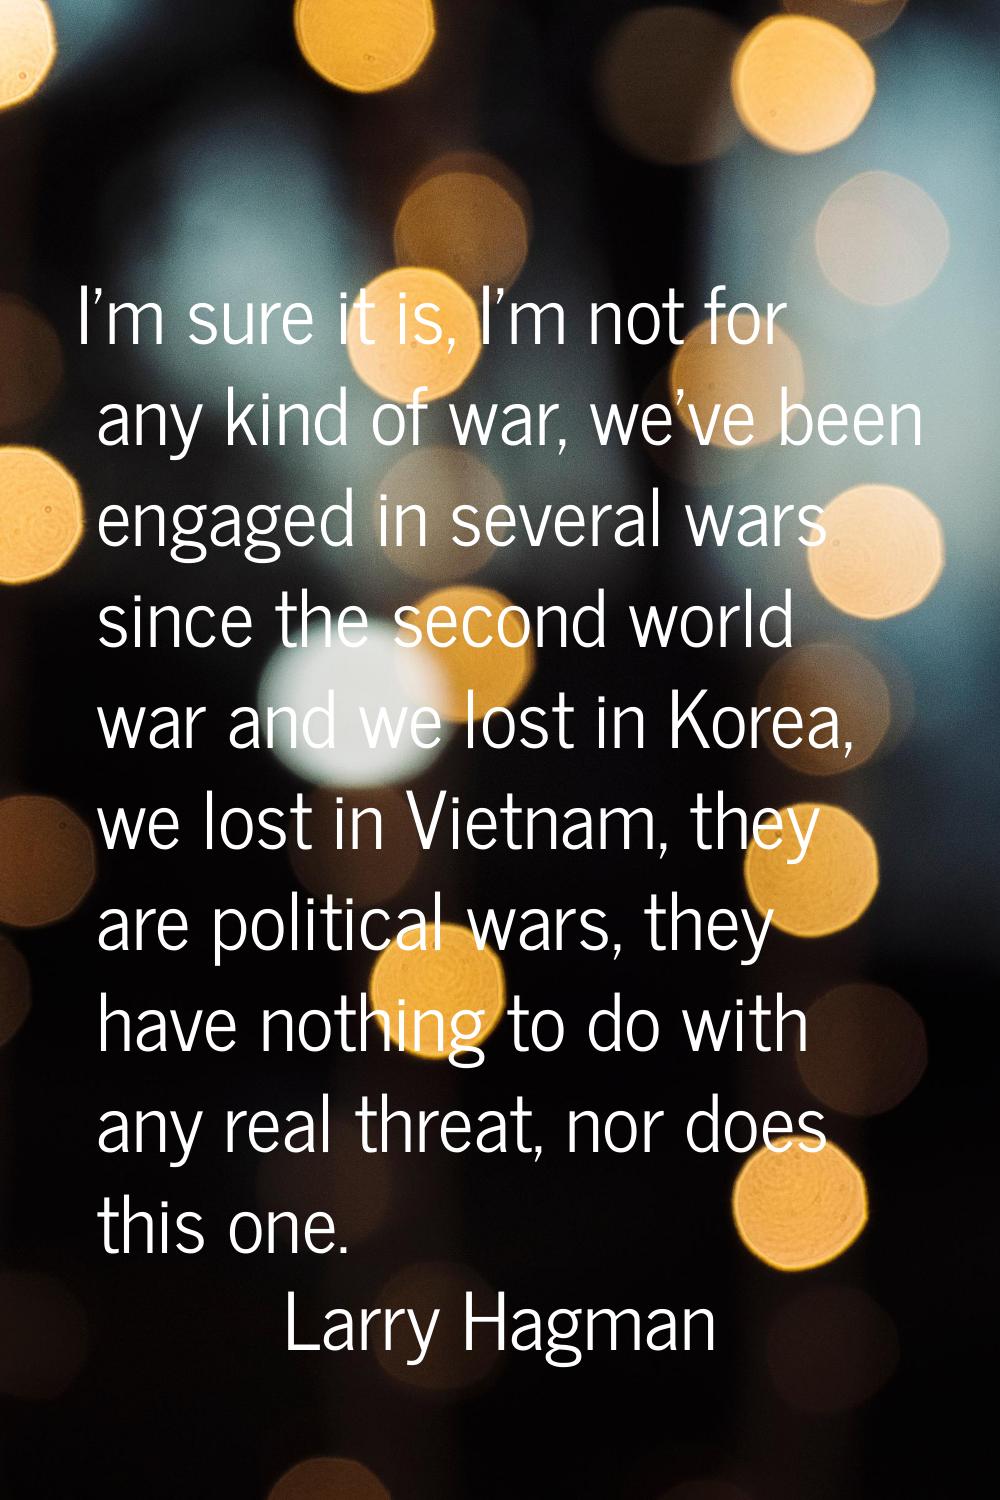 I'm sure it is, I'm not for any kind of war, we've been engaged in several wars since the second wo